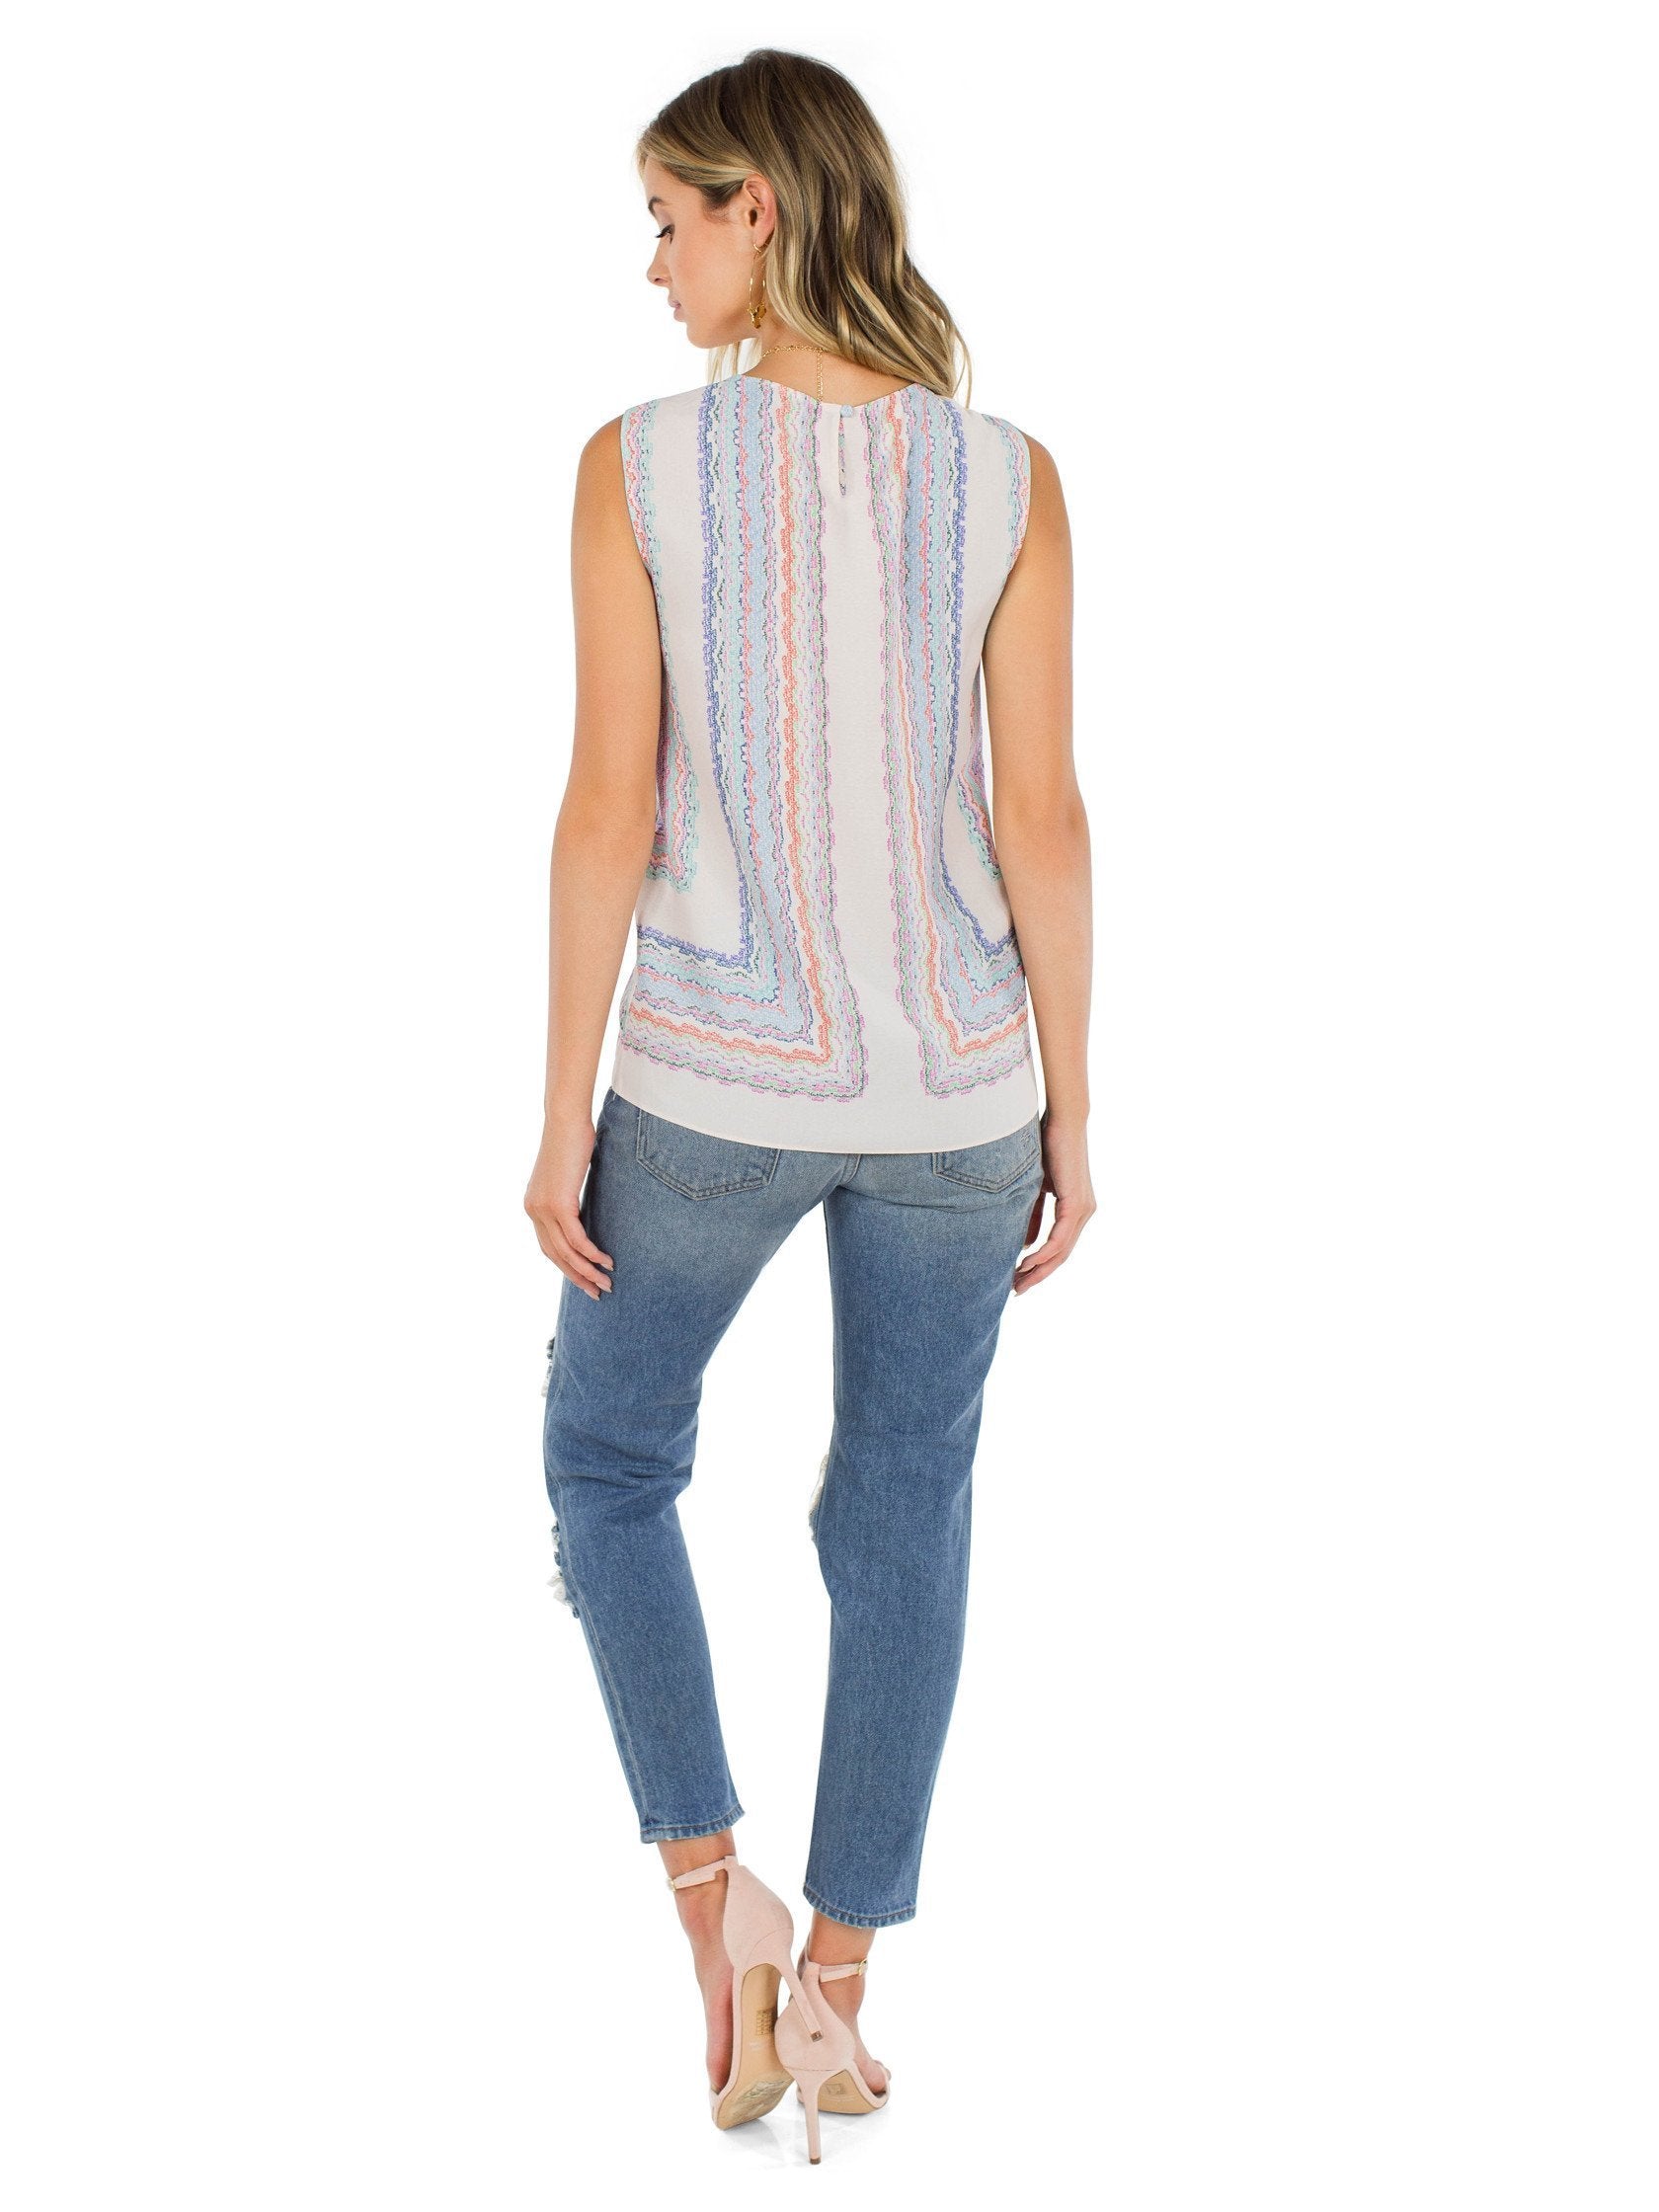 Women outfit in a top rental from BCBGMAXAZRIA called Maryssa Wrap Tank